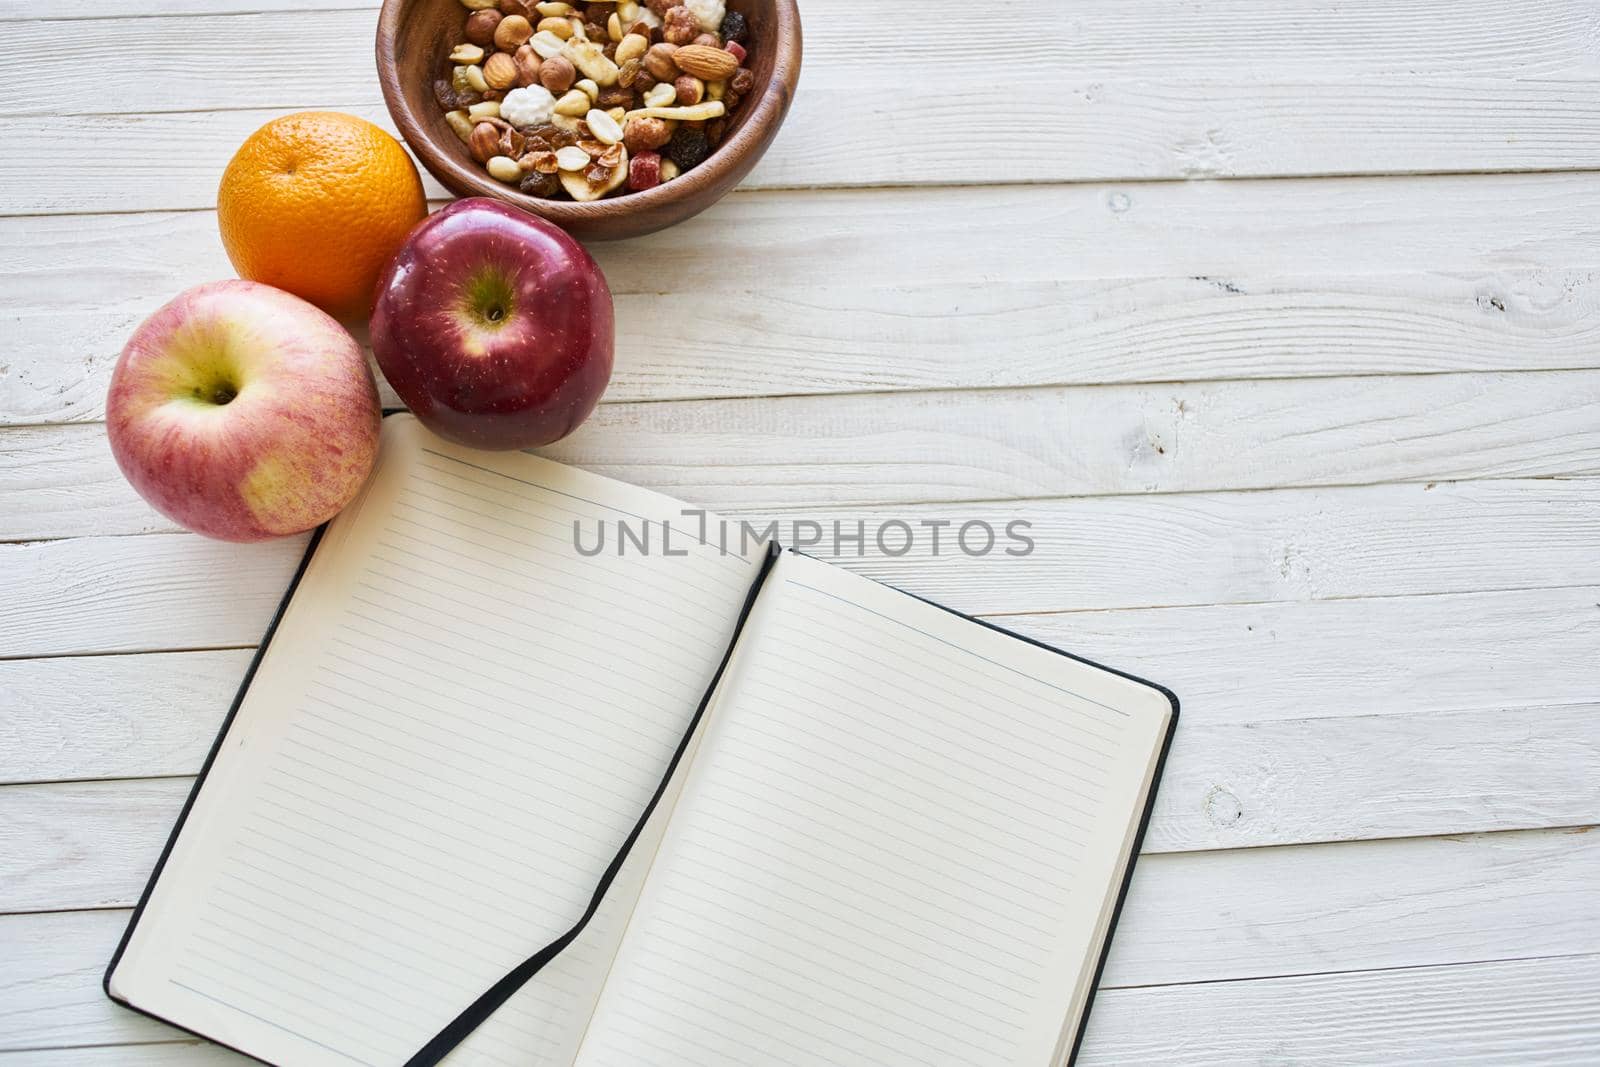 fruit cereals proper nutrition notepad breakfast diet top view. High quality photo